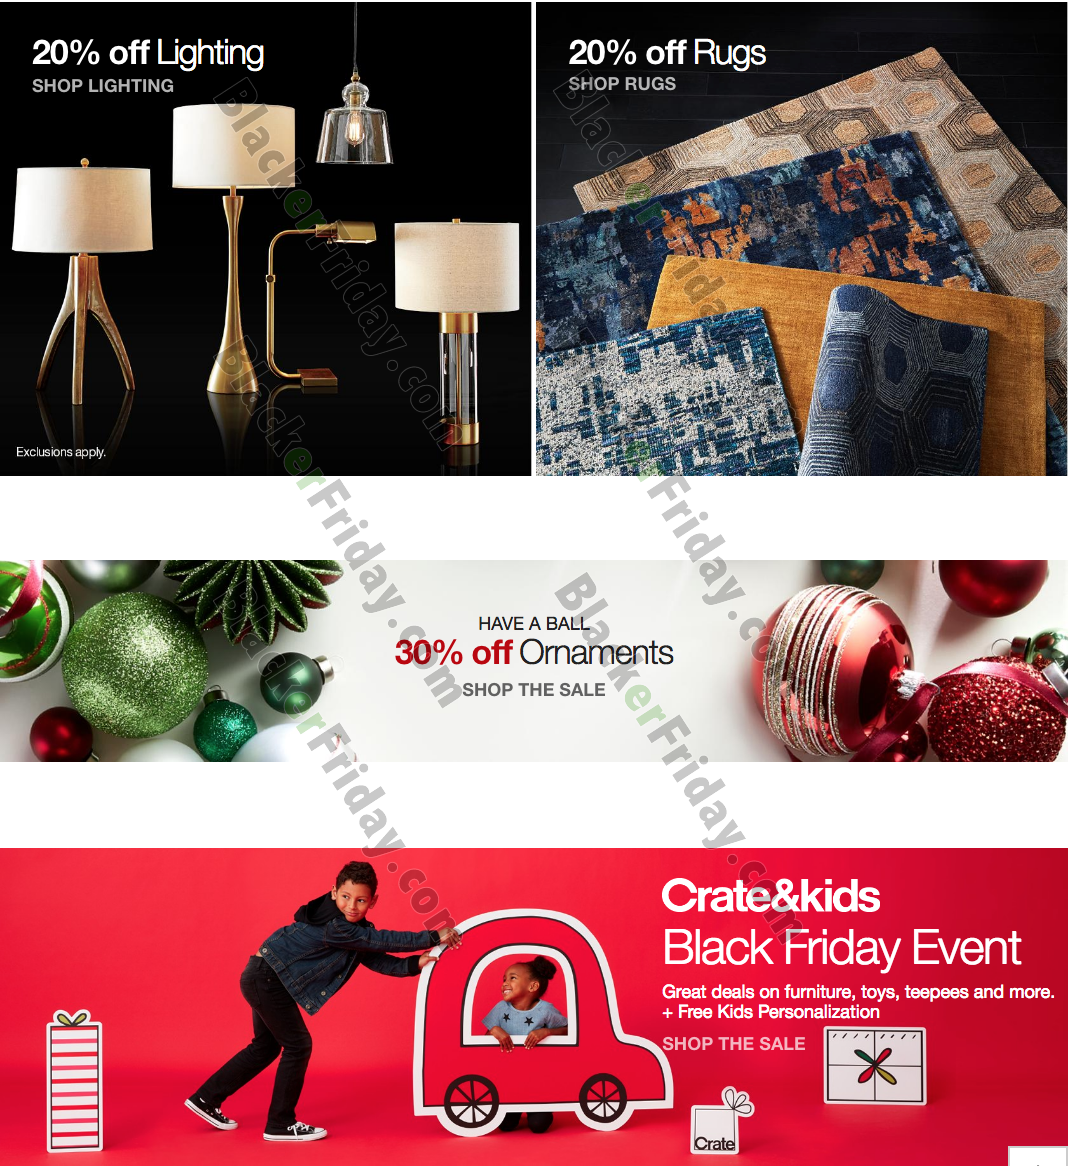 Crate & Barrel Black Friday 2021 Sale - What to Expect - Blacker Friday - Does Quadratec Have Black Friday Deals